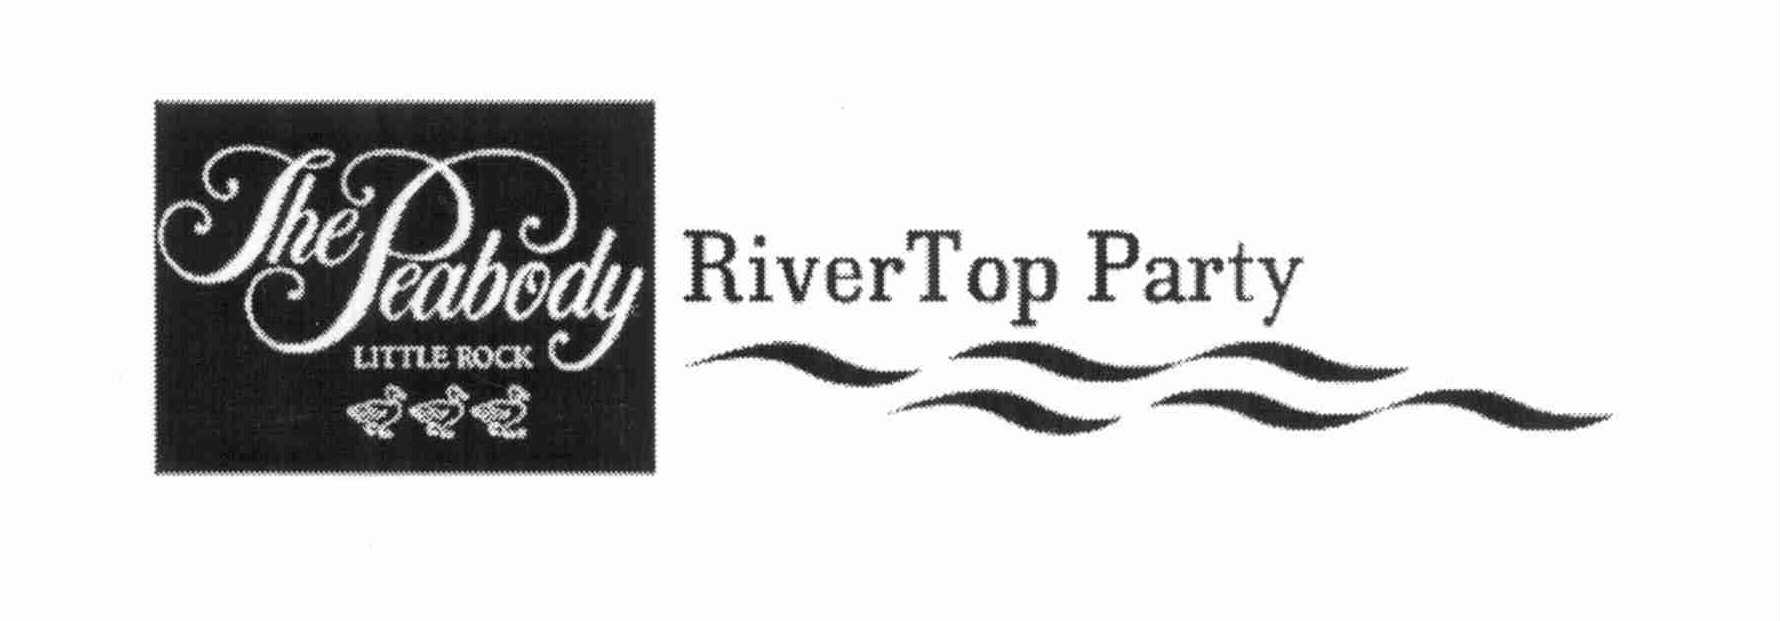  THE PEABODY LITTLE ROCK RIVERTOP PARTY